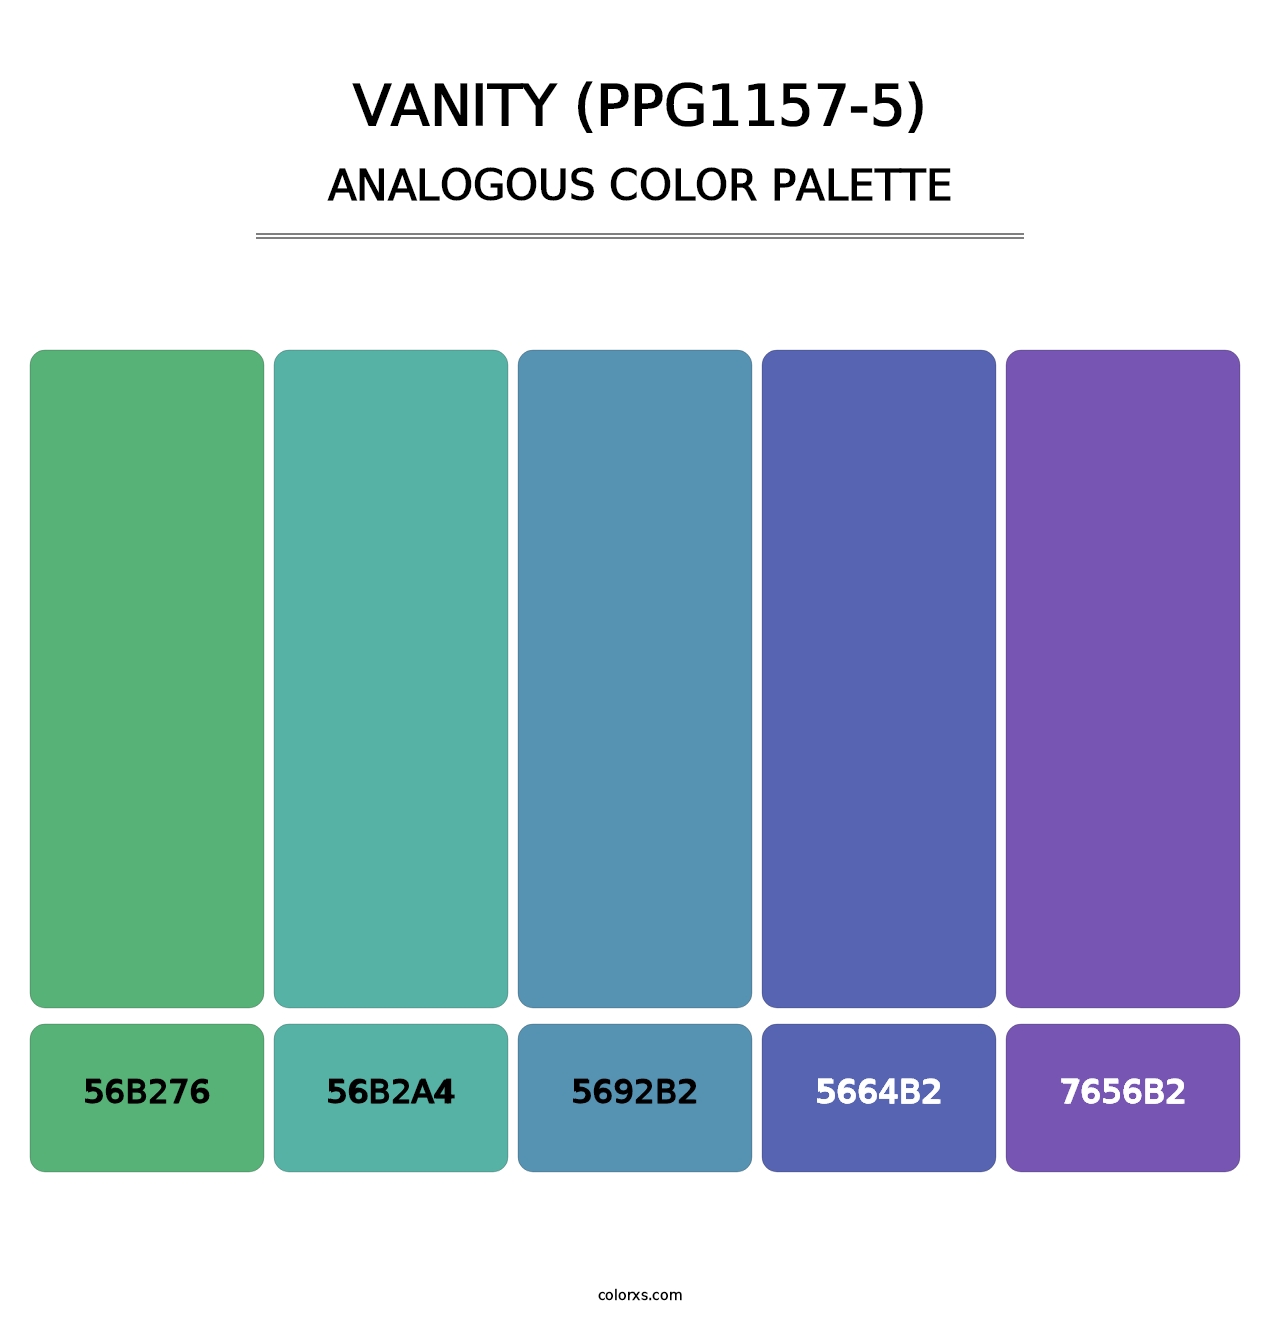 Vanity (PPG1157-5) - Analogous Color Palette